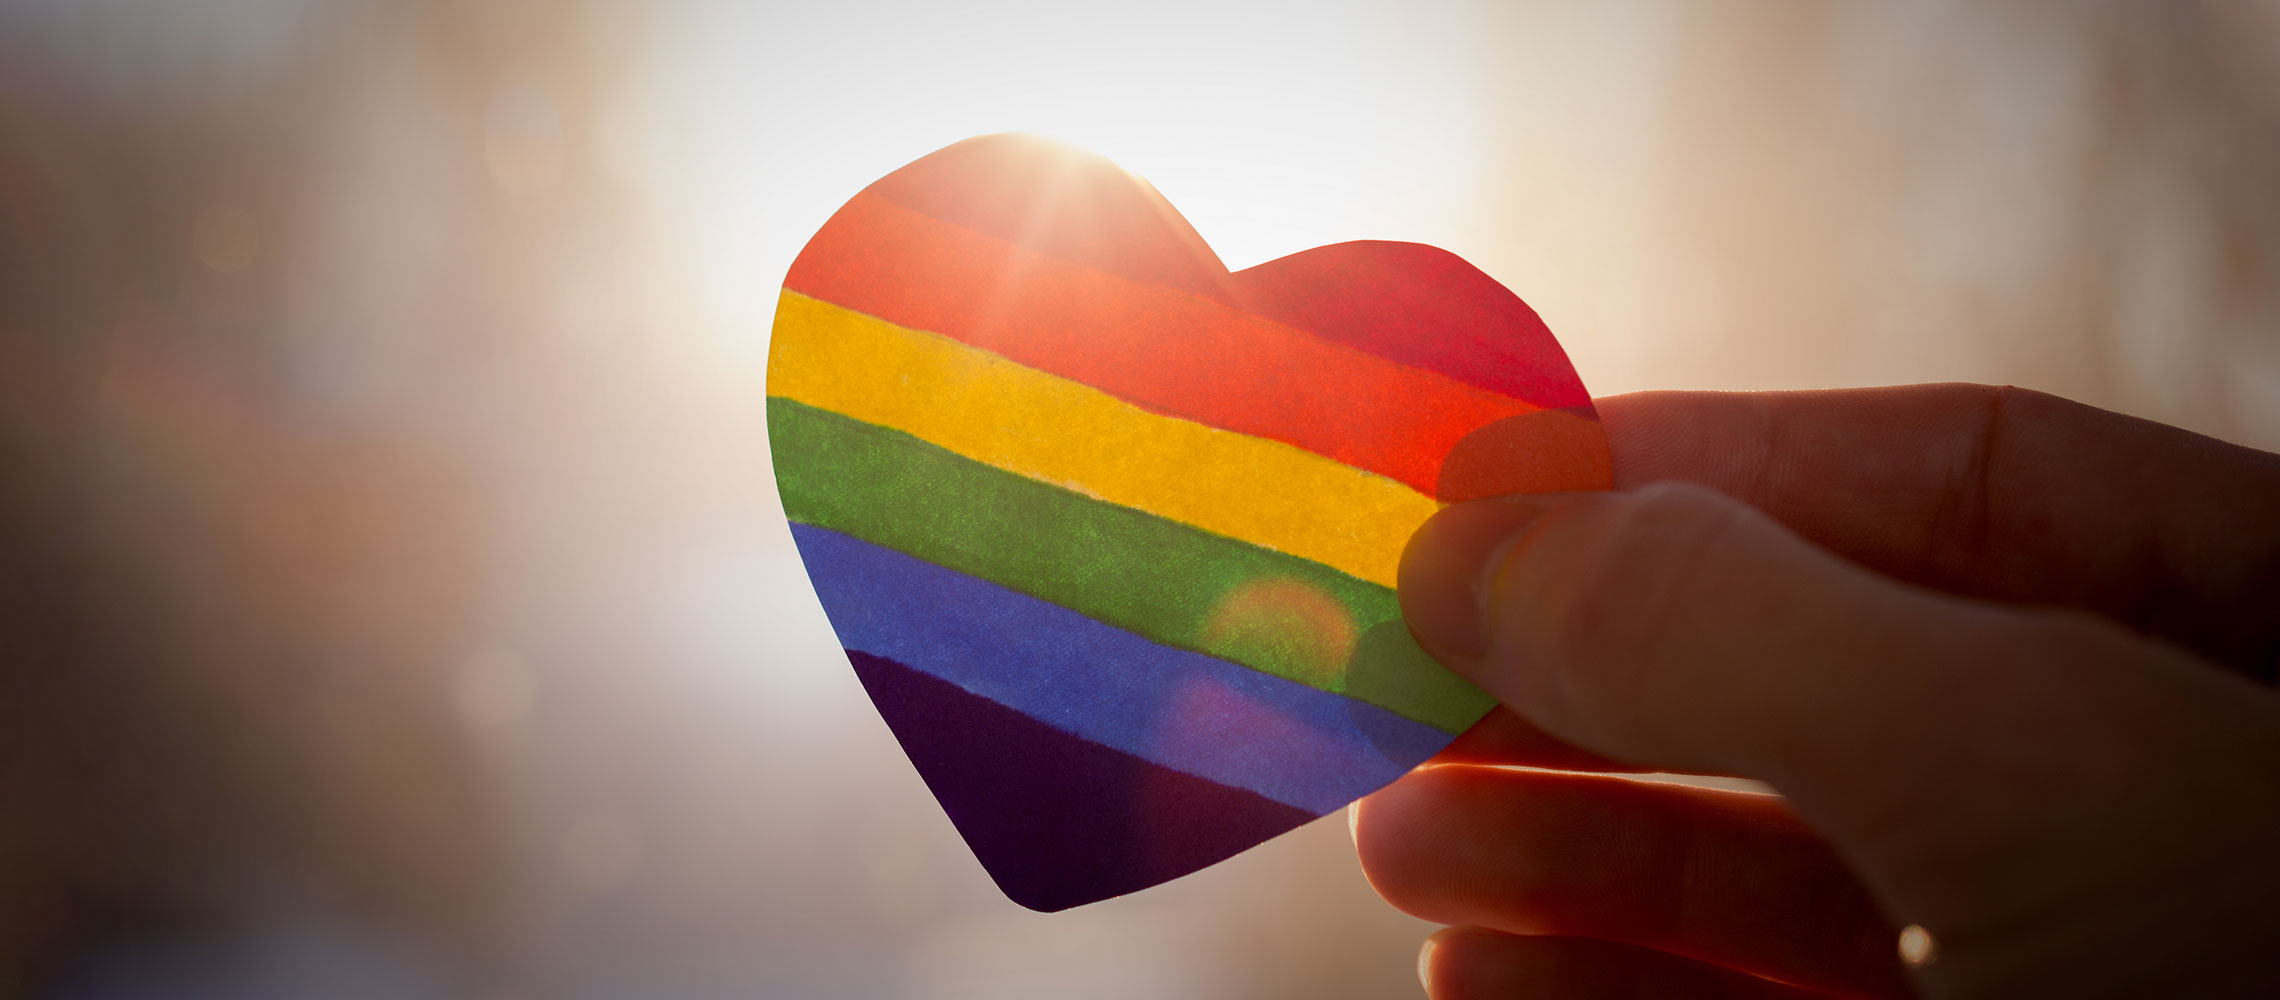 rainbow-colored paper heart being held by fingers